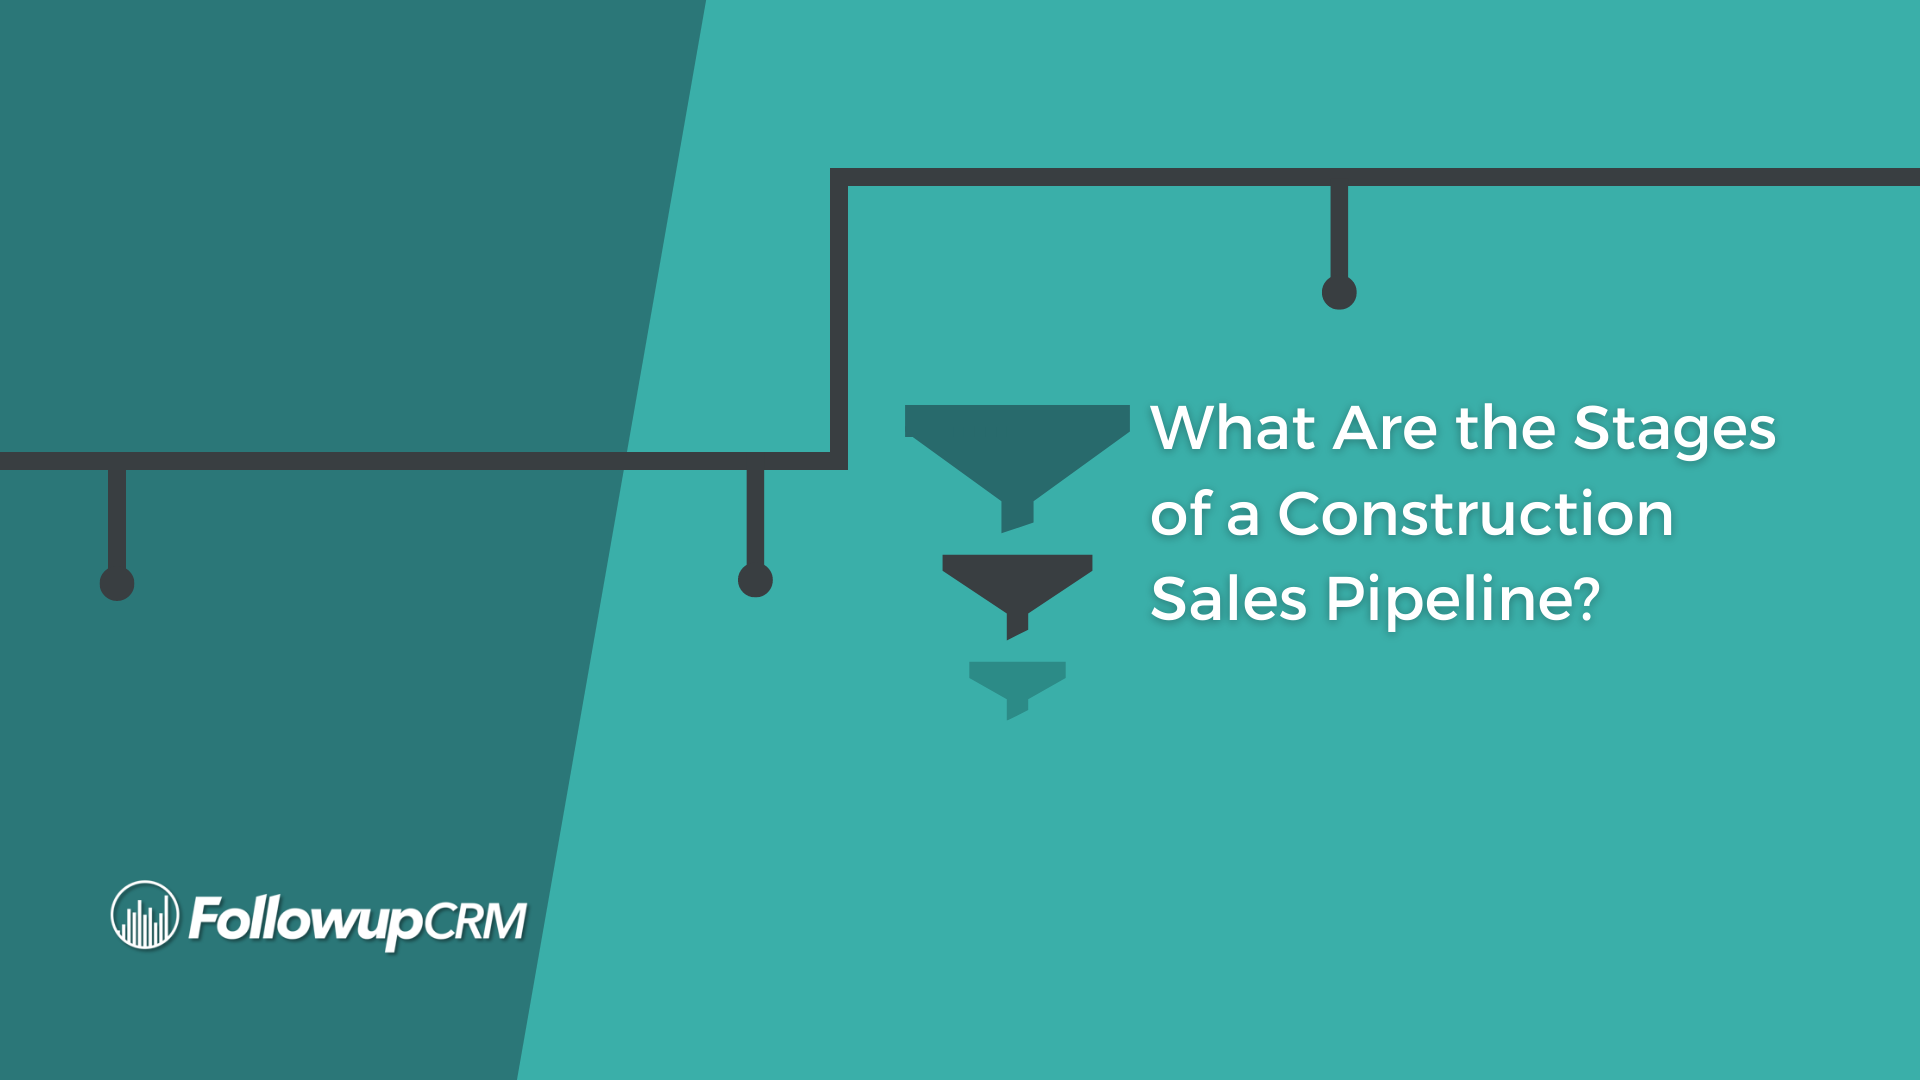 What Are the Stages of a Construction Sales Pipeline?